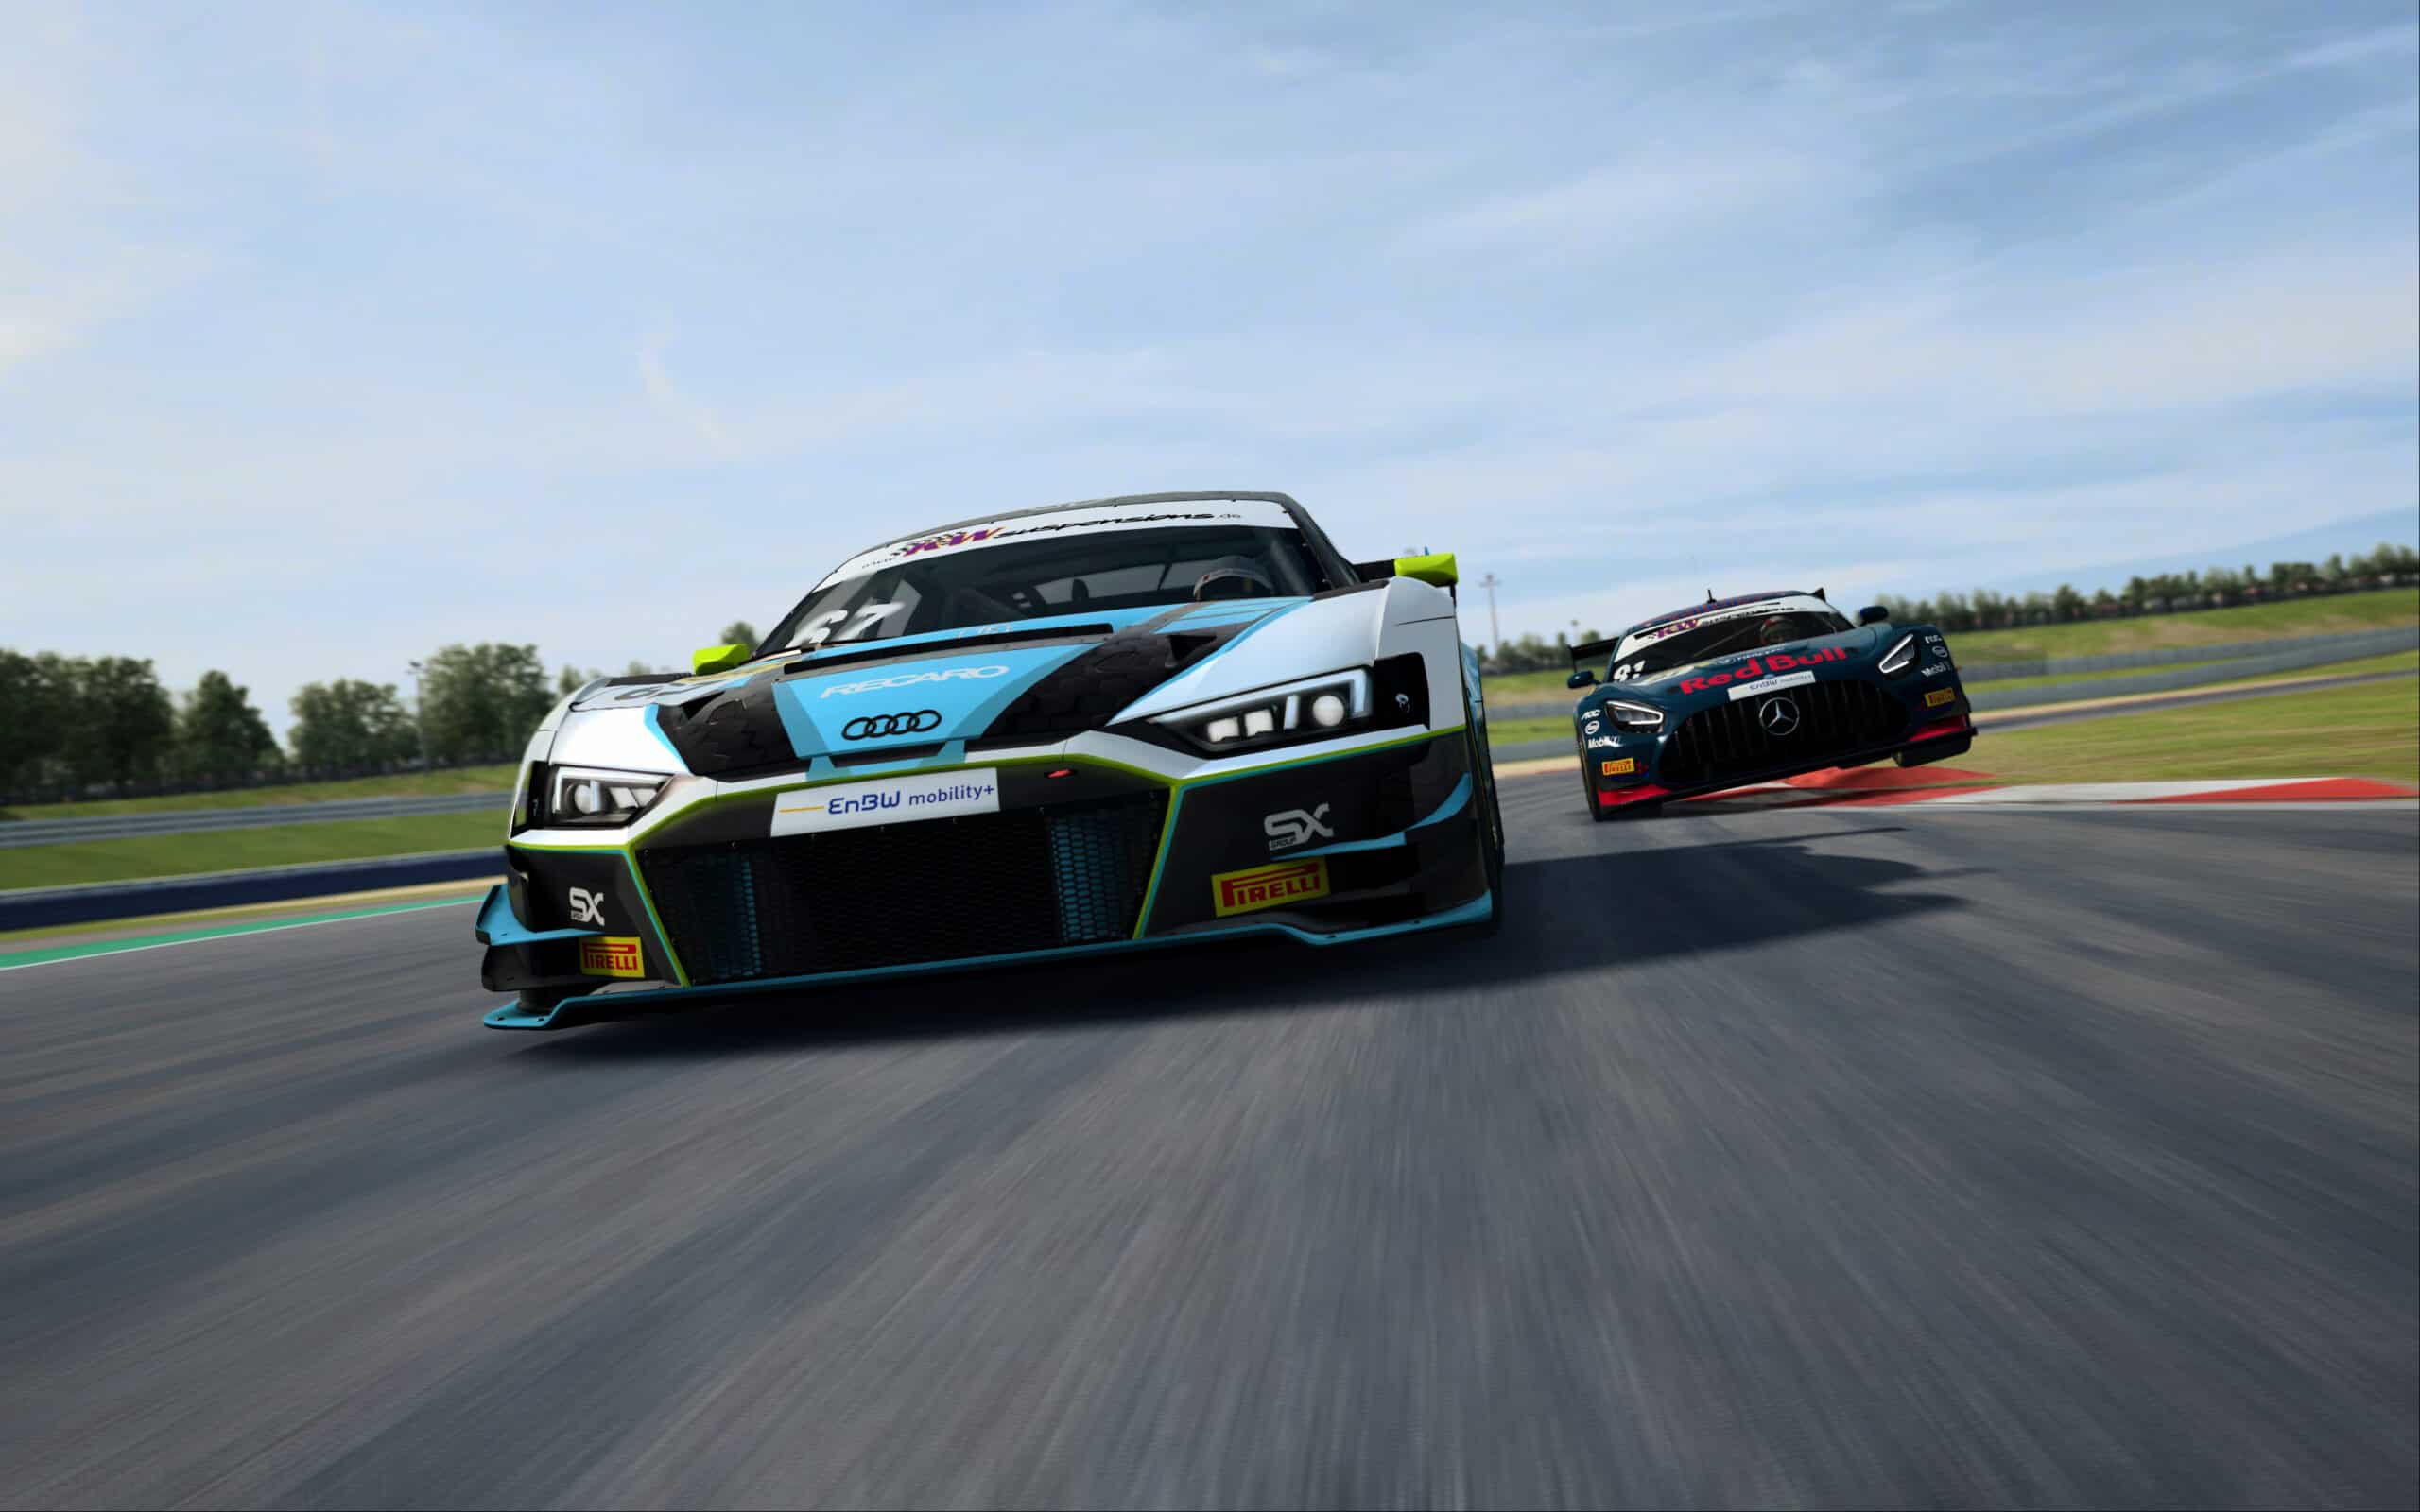 WATCH the 2021 ADAC GT Masters Esports Championship exclusively on Traxion